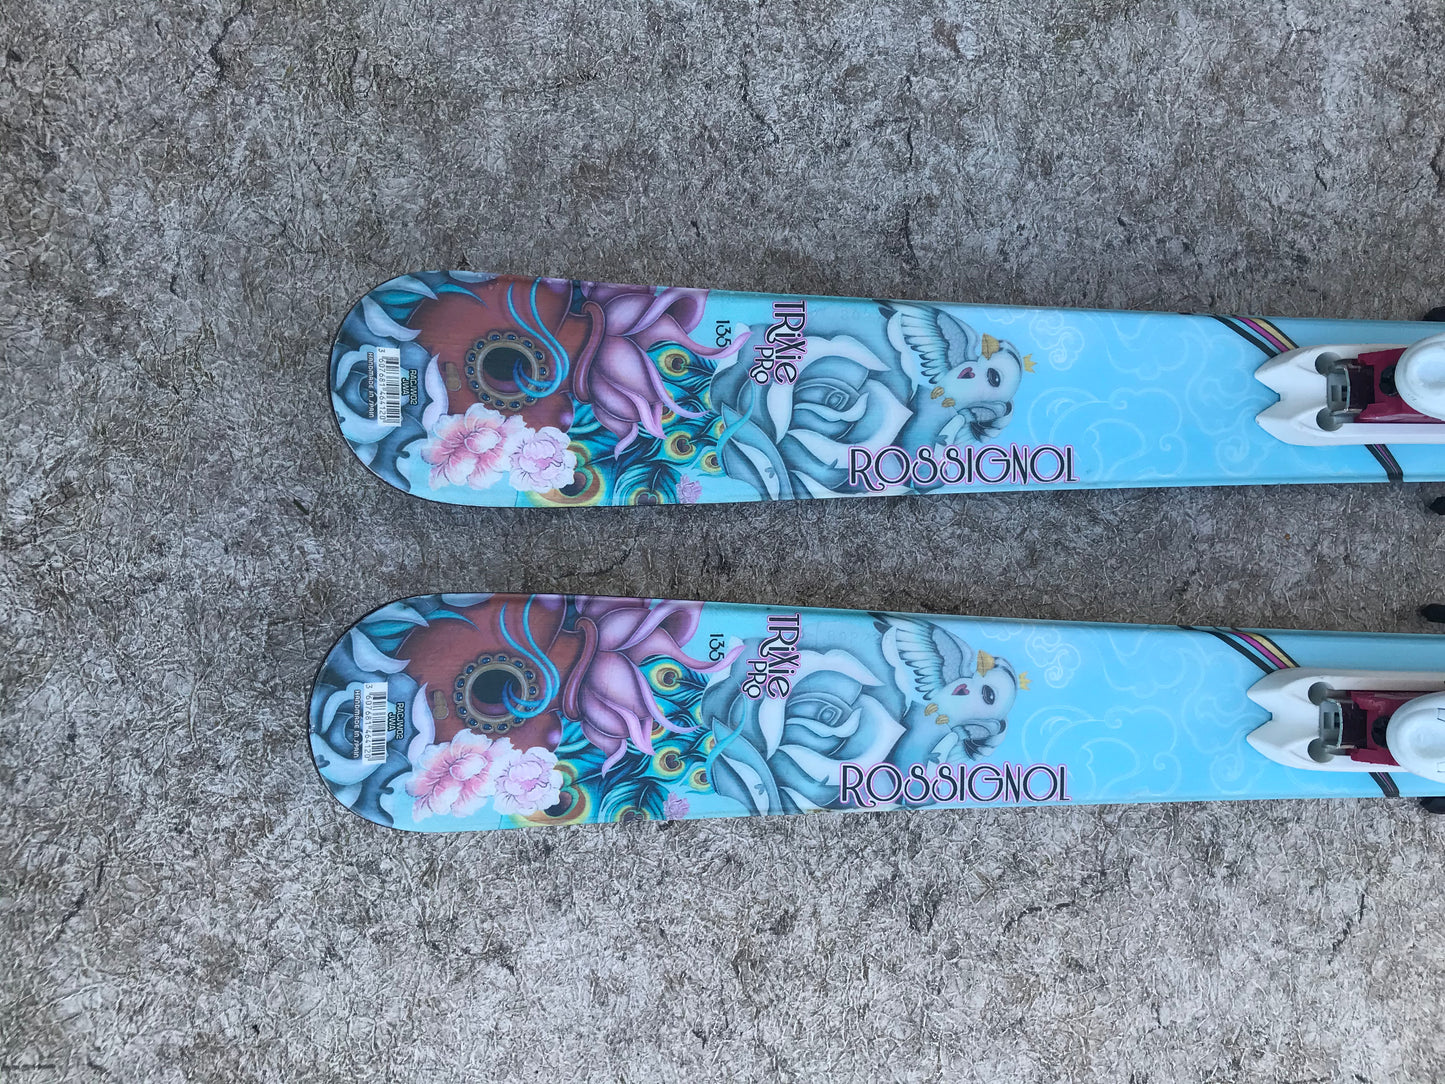 Ski 135 Rossignol Trixie Twin Tip Free Ride Parabolic Blue Pink With Bindings Excellent